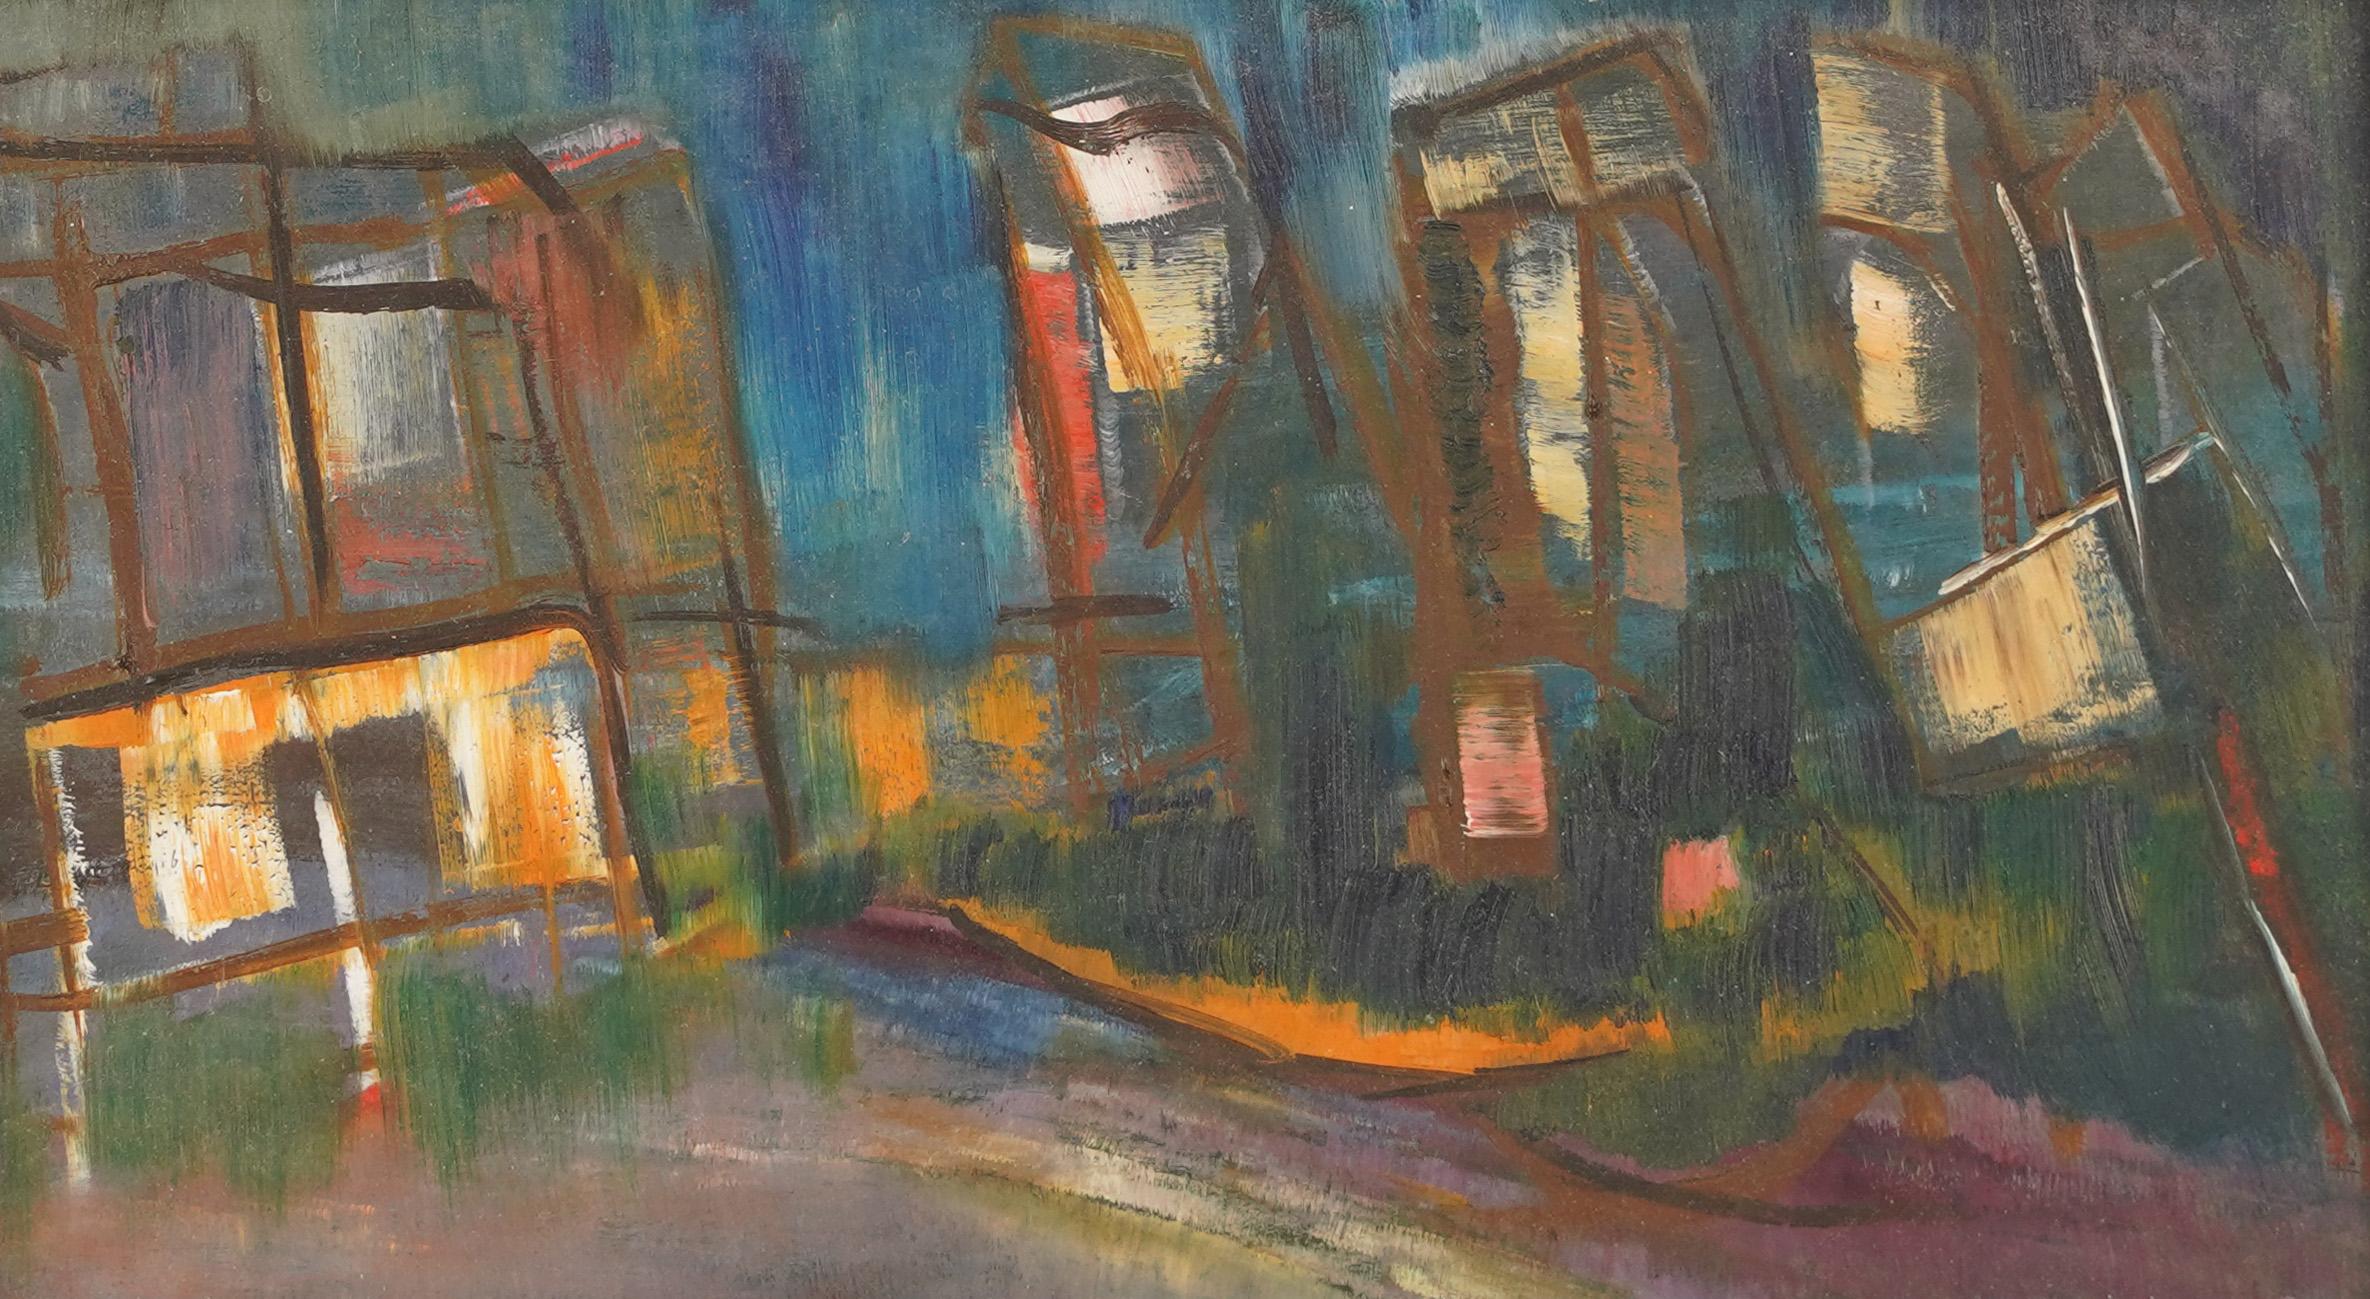 Antique American modernist abstract street scene oil painting.  Oil on board.  Framed.  Image size, 12L x 7H.